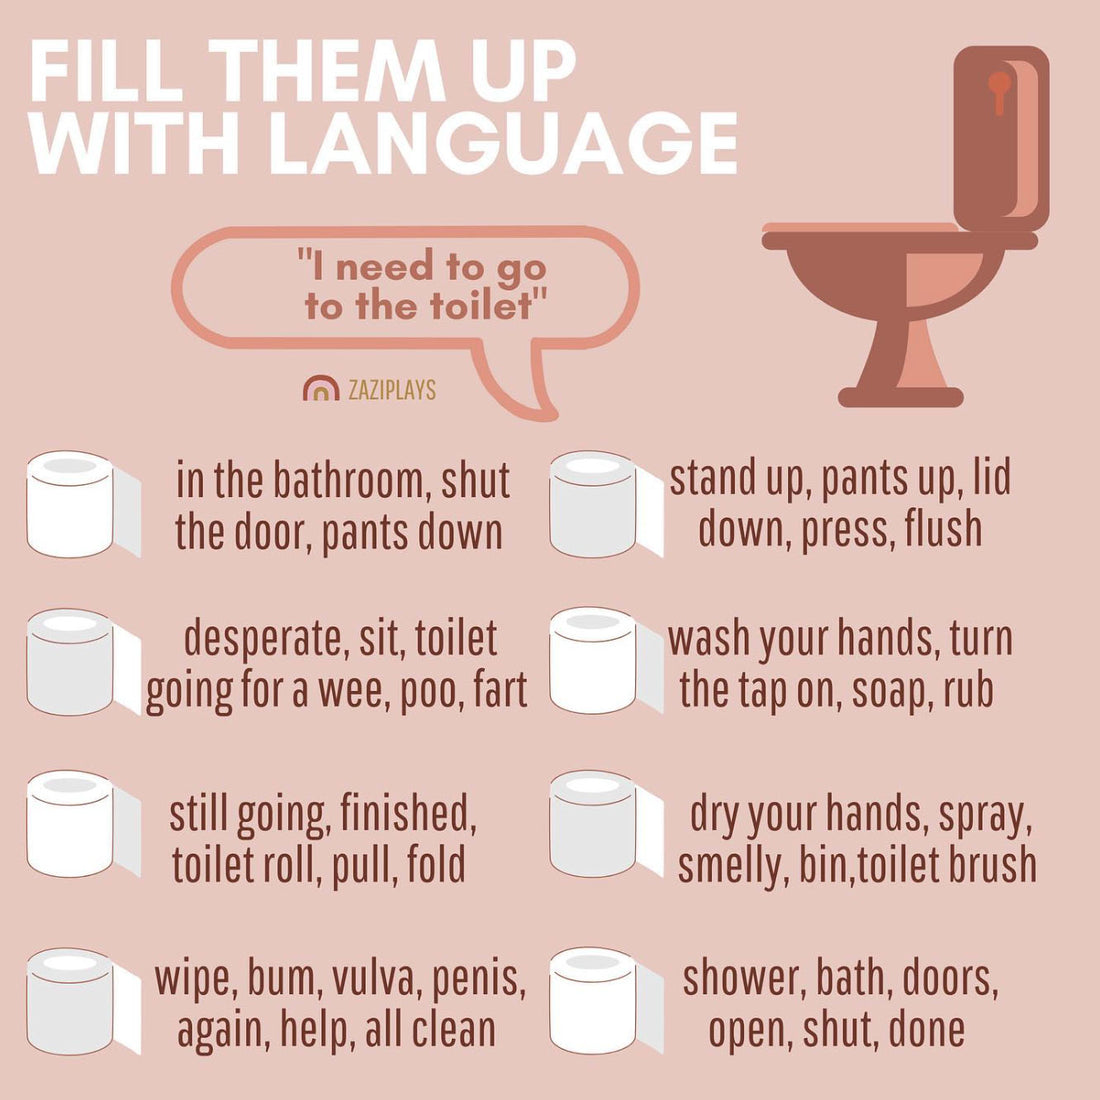 Fill them up with language: Toilet Edition